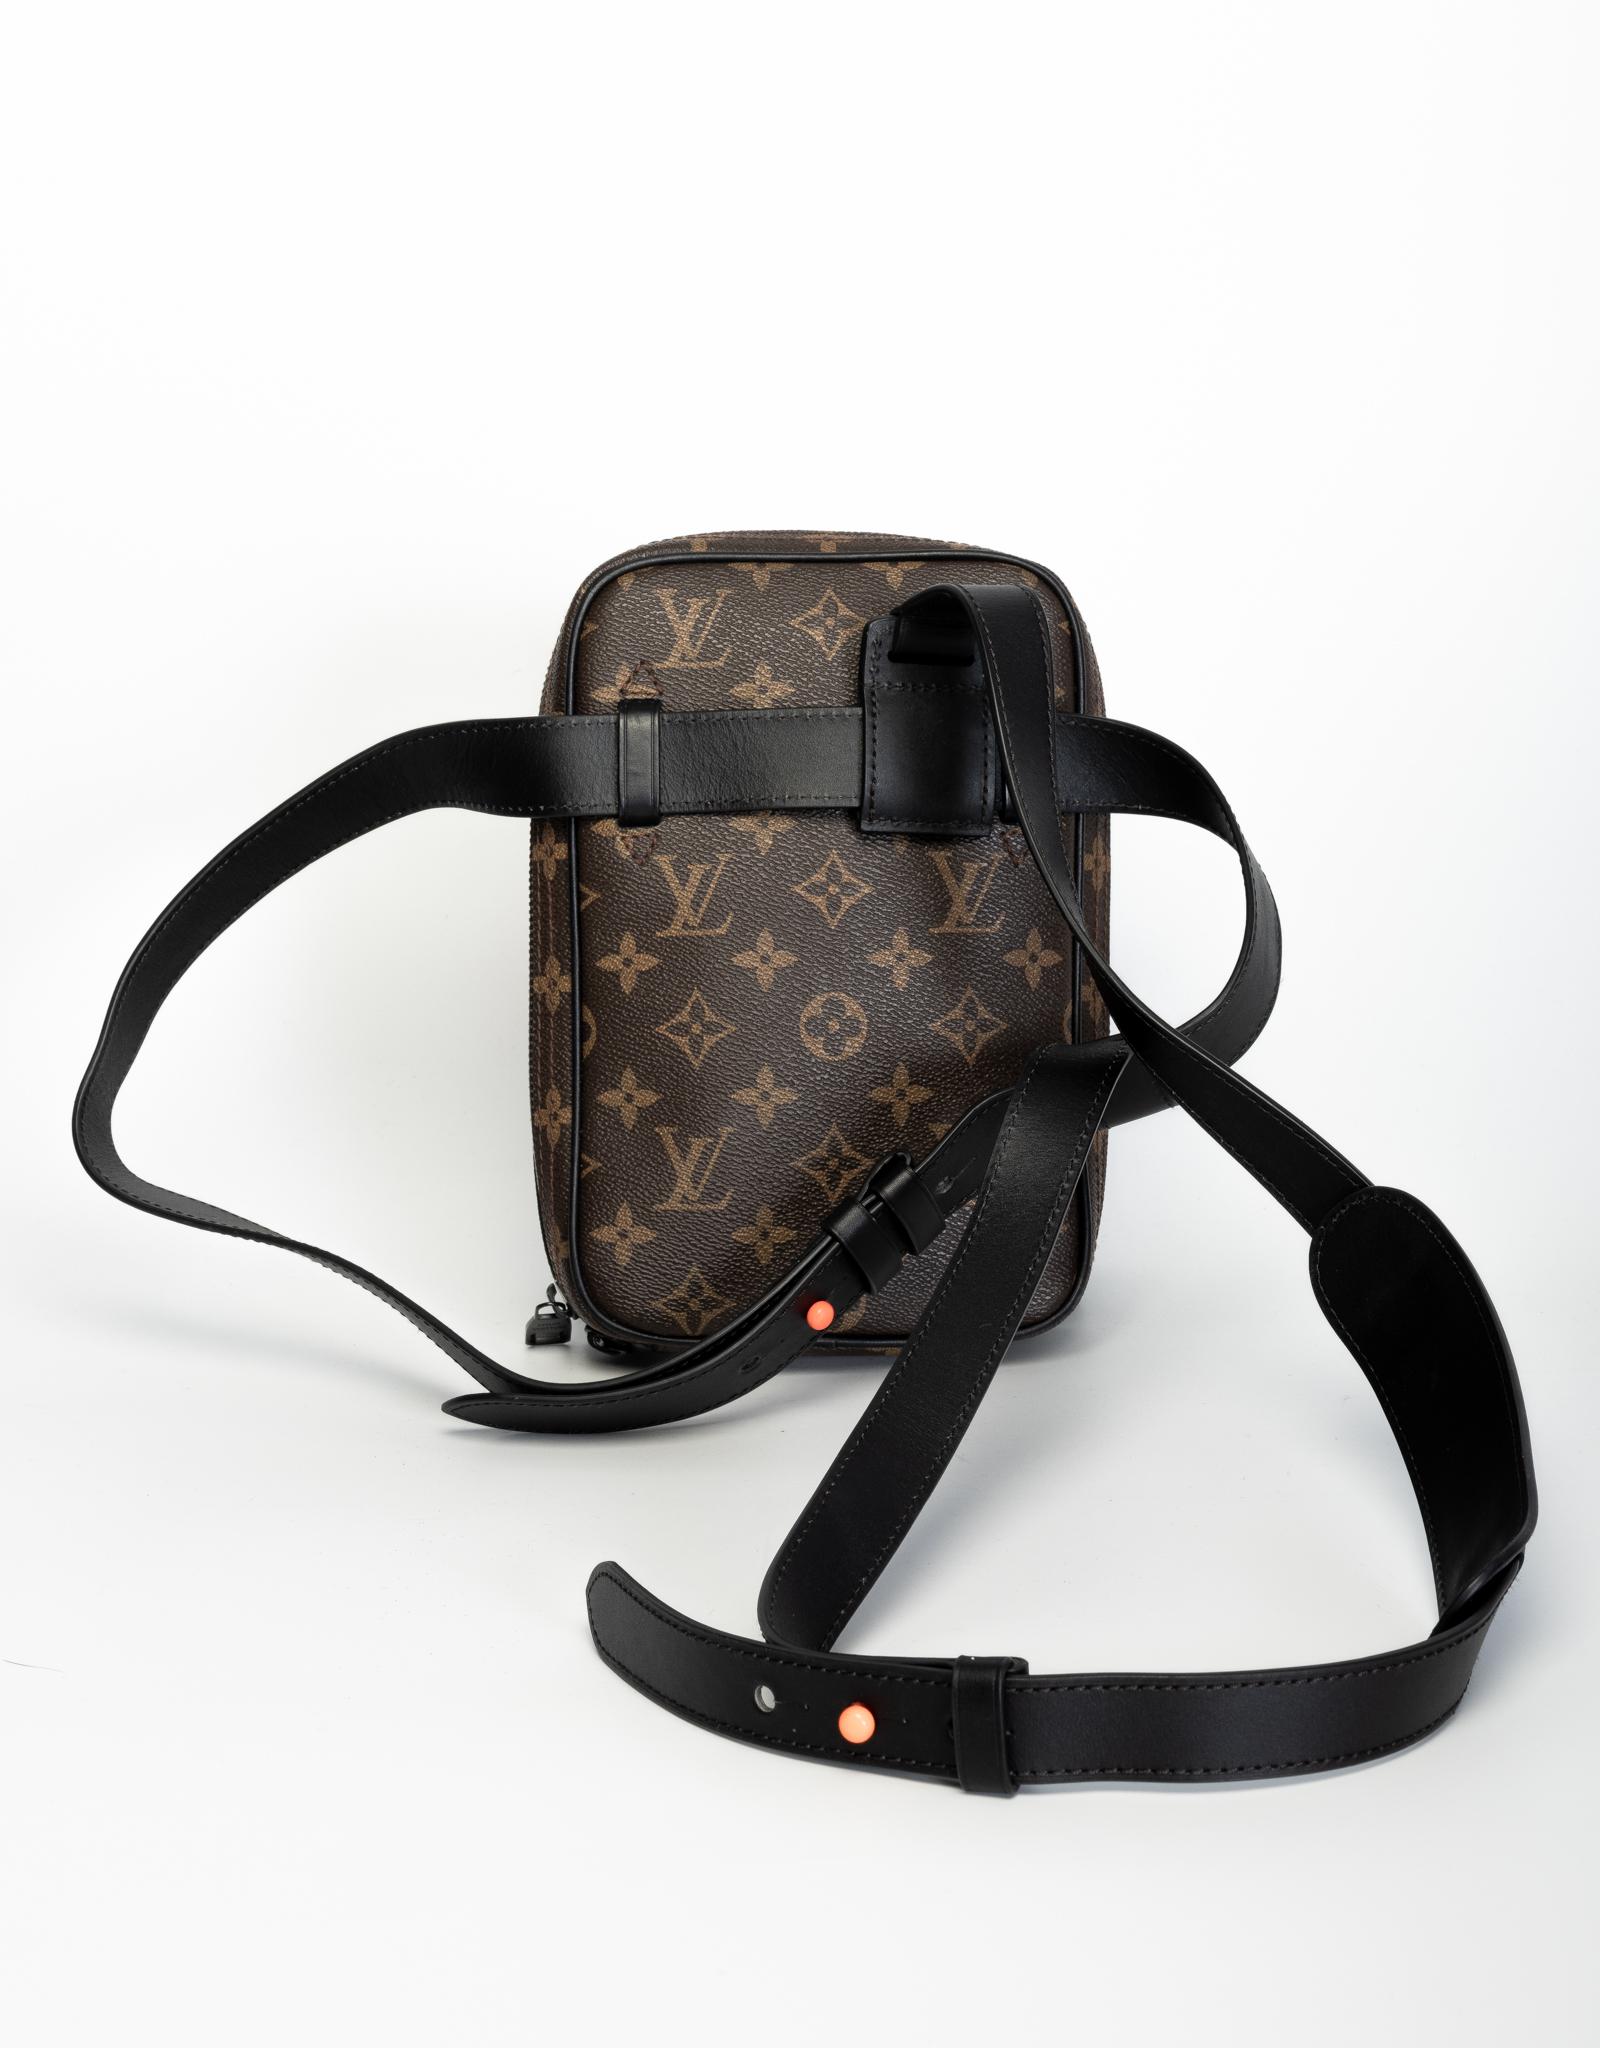 This messenger bag is designed by Off-White founder Virgil Abloh Virgil and combines street style with the classic lv monogram. Brown monogram canvas with black leather trim, rap around zip closure, neon orange details, black hardware and black